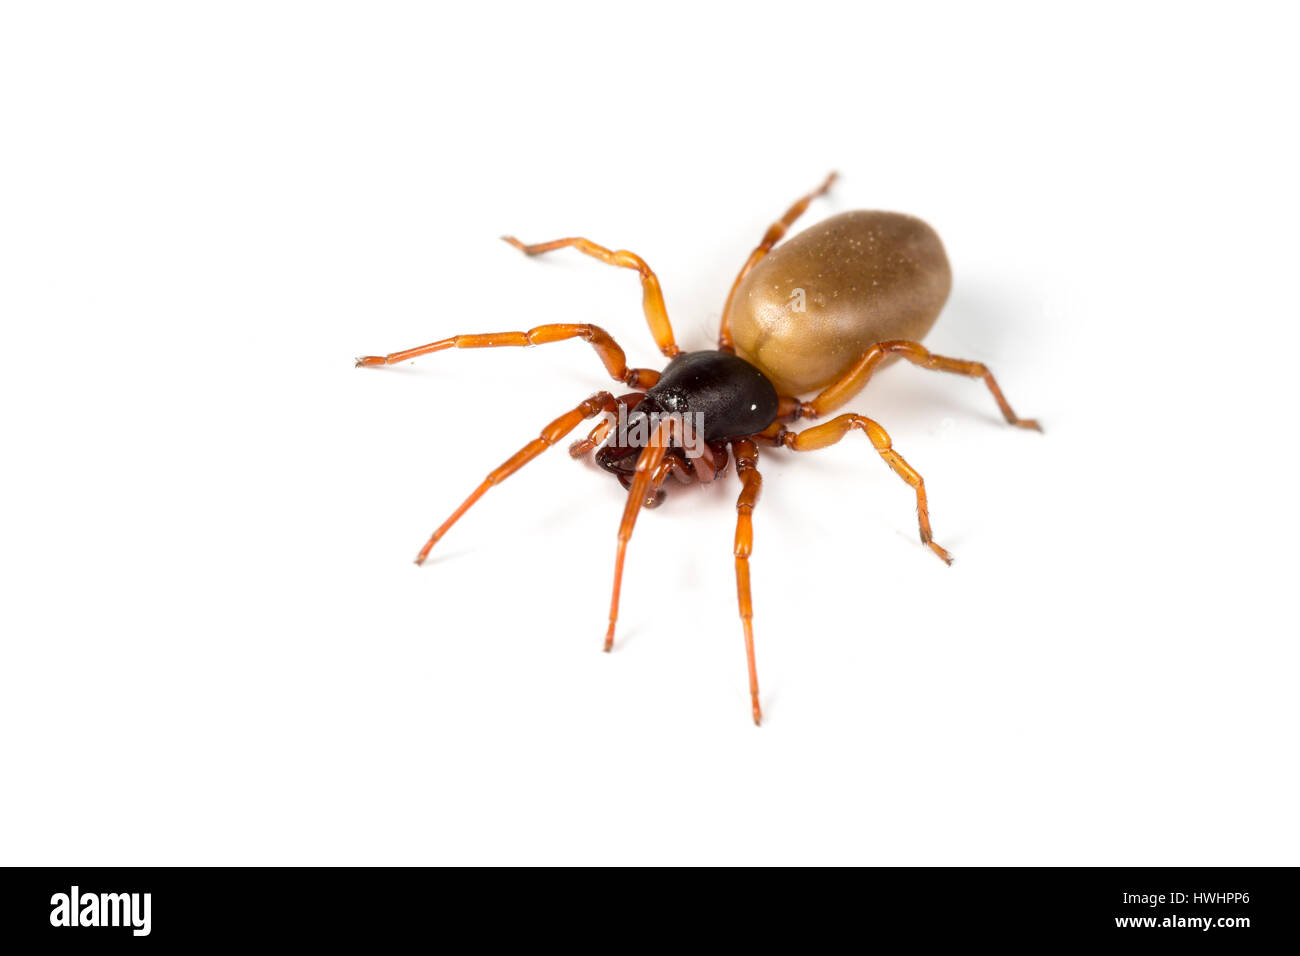 What to Know About the Woodlouse Spider in Your House